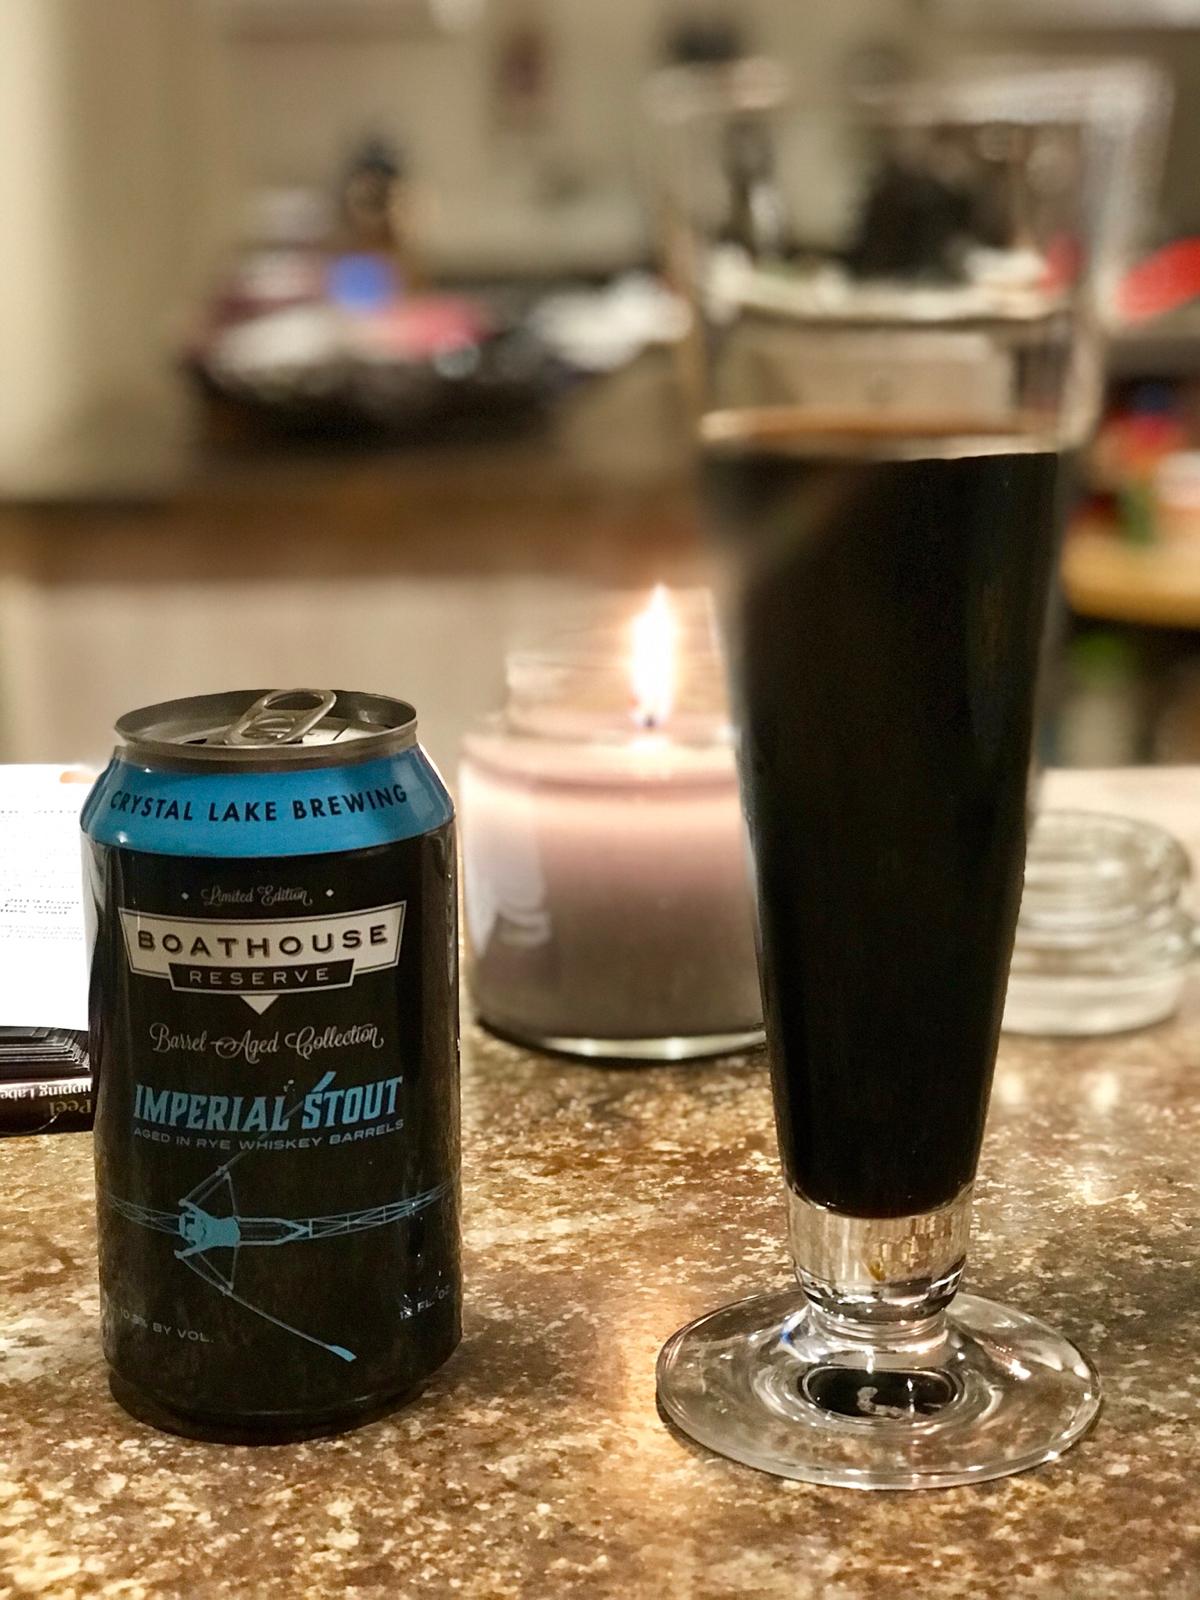 Boathouse Reserve Barrel Aged Imperial Stout